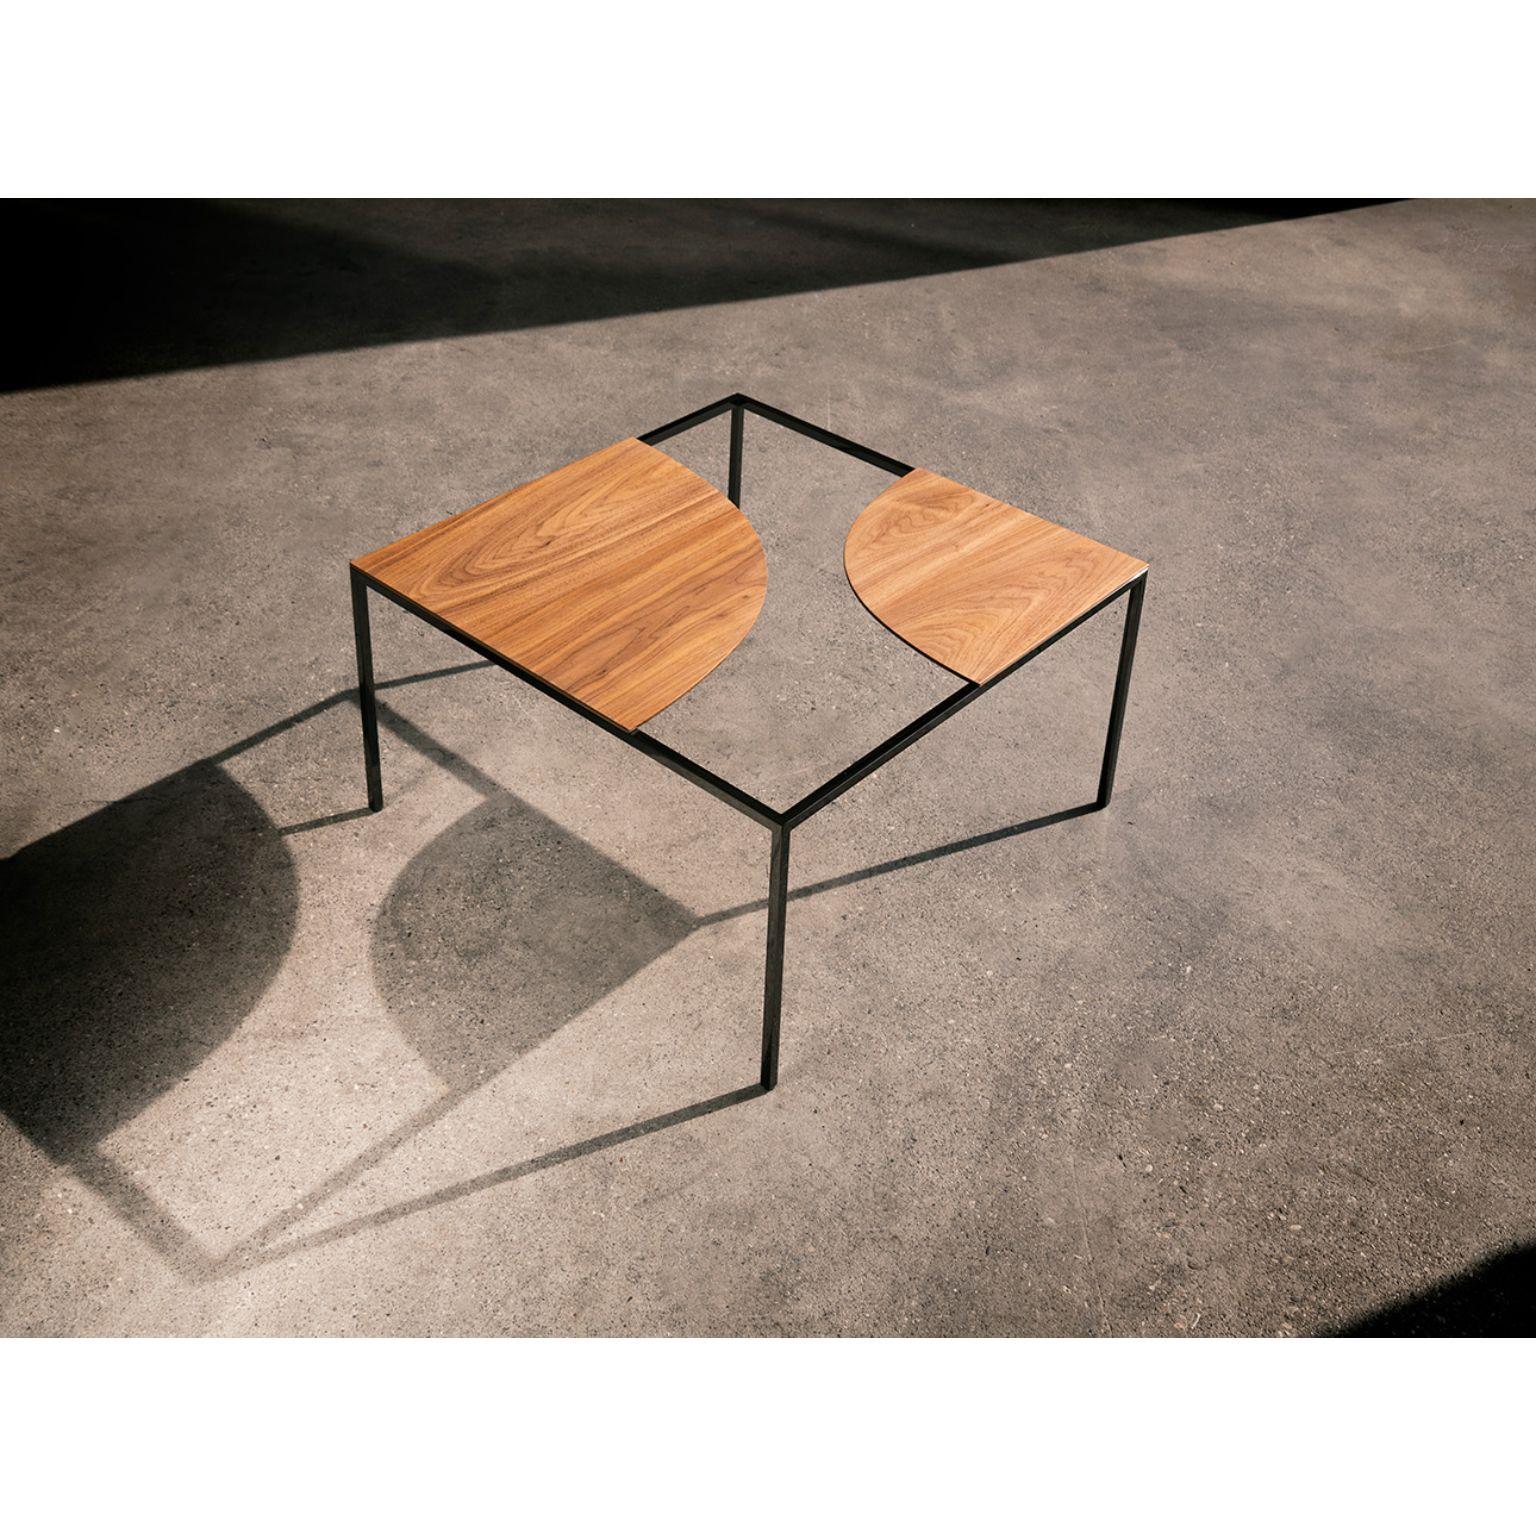 Creek coffee table by Nendo
Materials: Top: solid wood 
 Structure: Black chrome metal
Dimensions: W60 x D60 x H31.7 cm

Creek is a table that suggests a stream of water flowing freely across its surface and around islands,
circling around the